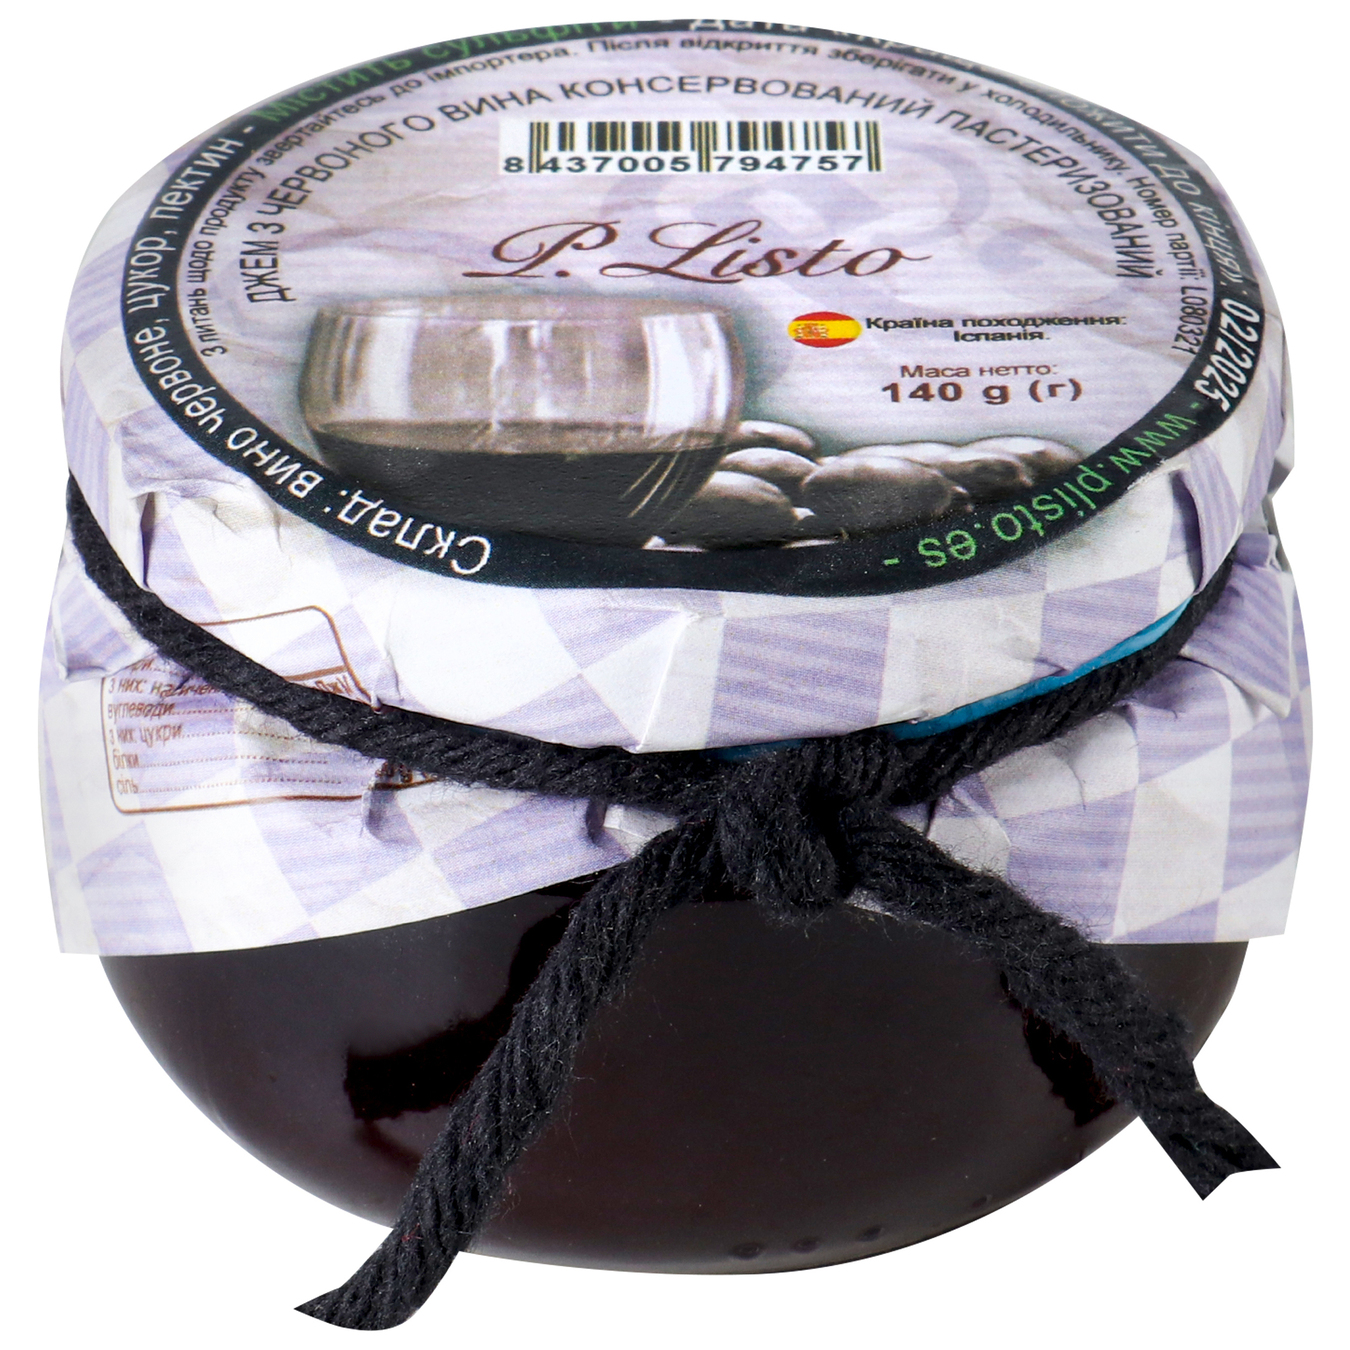 Jam P.Listo from Chevron wine, canned, pasteurized, 140g 2